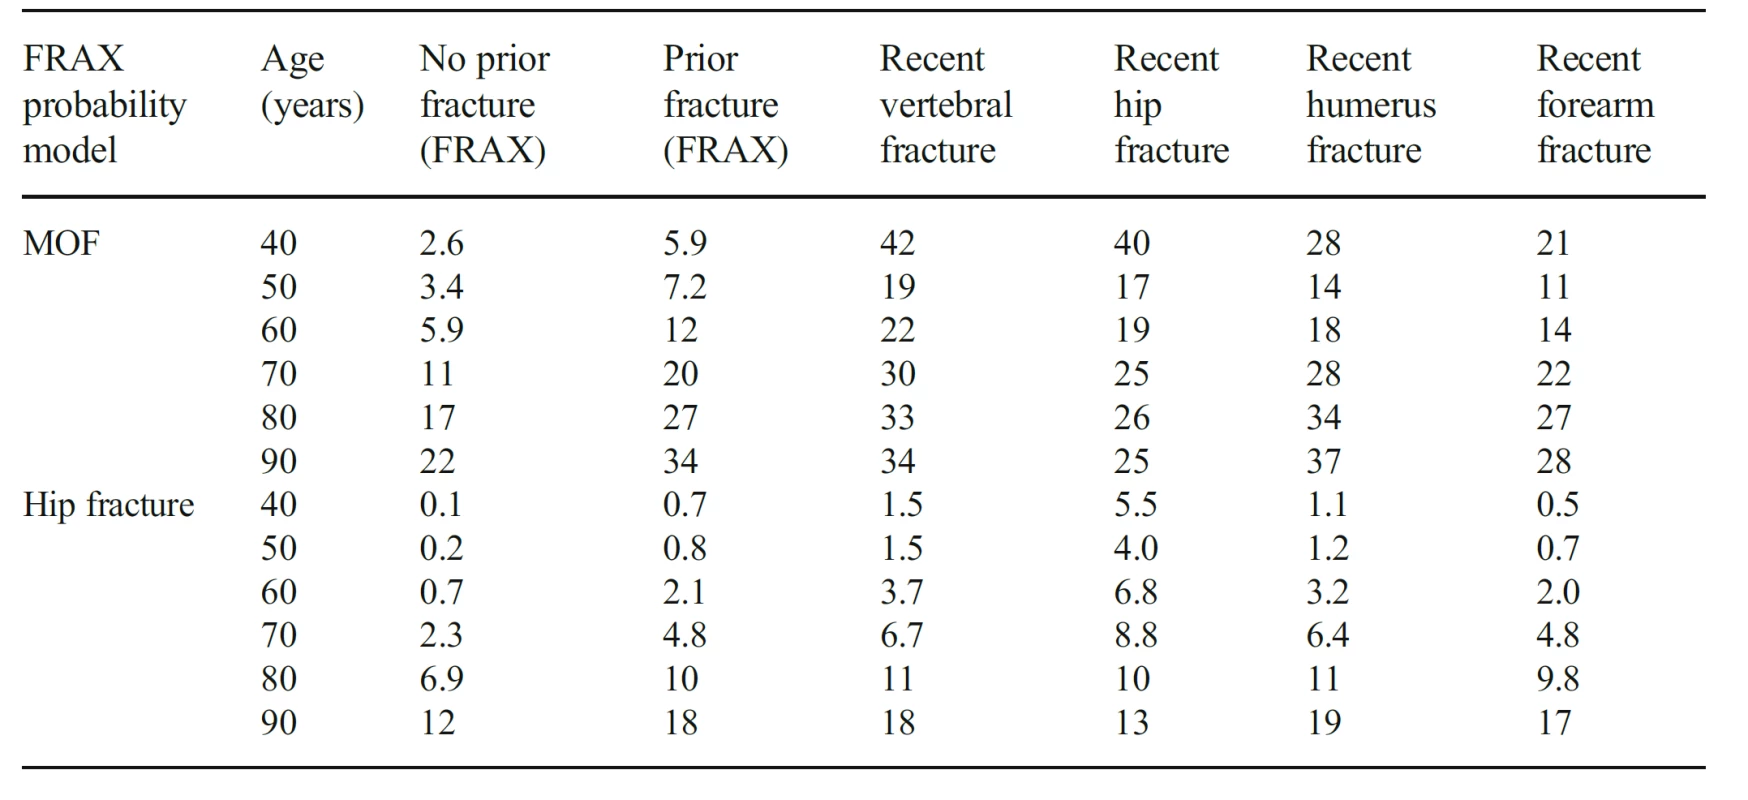 The 10-year probability
of major osteoporotic fracture
(MOF) and hip fracture in women
from the UK (BMI set at 25 kg/
m2). The probabilities ‘no prior
fracture’ and ‘prior fracture’ are
calculated using FRAX in the absence
of other clinical risk factors.
The remaining probabilities are
for recent (0–2 years) sentinel
fractures adjusted according to the
present study